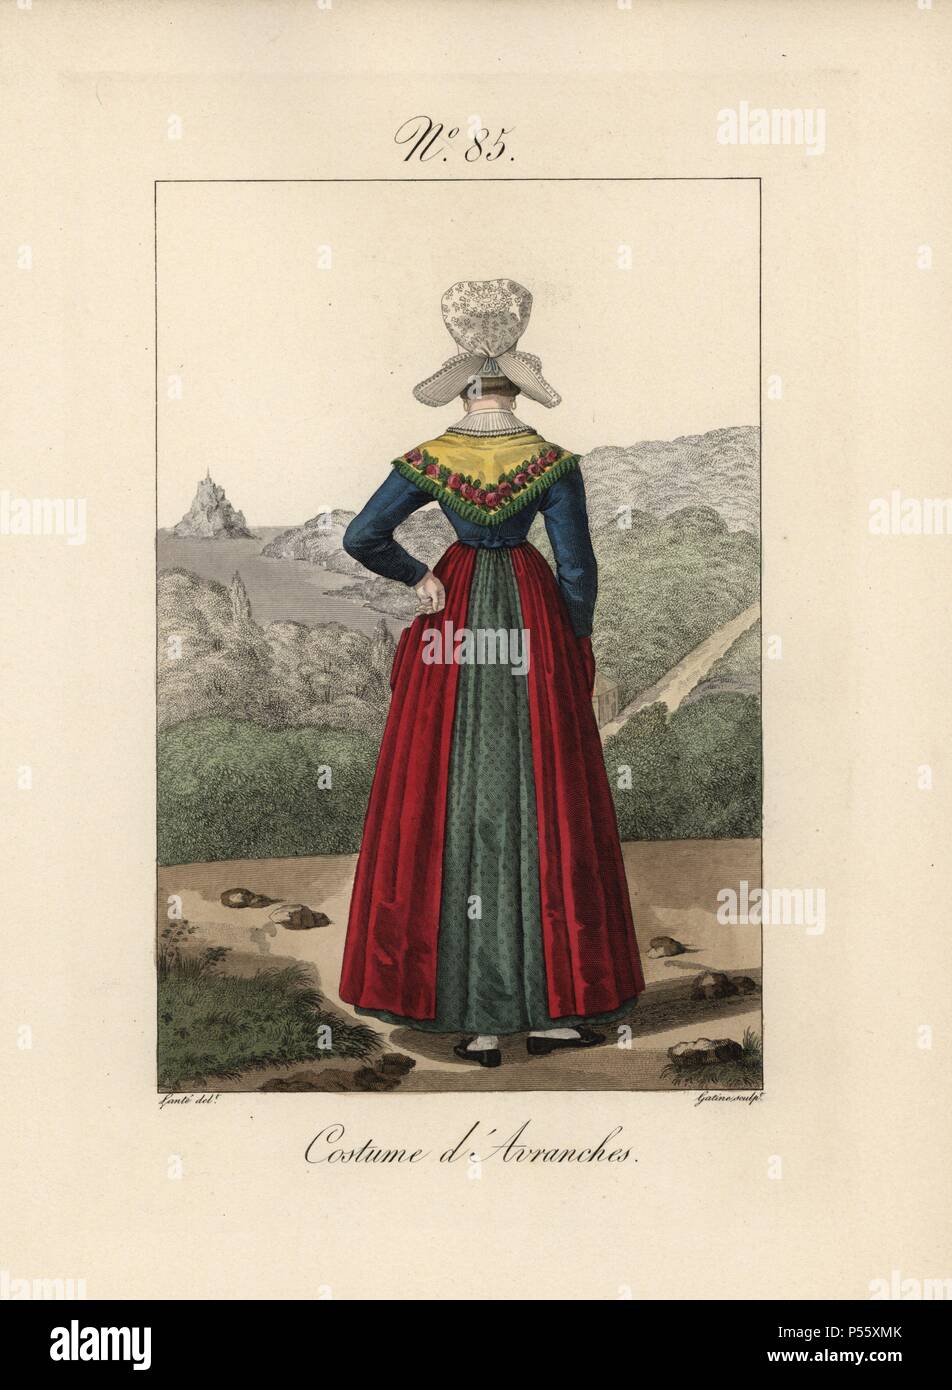 Costume of Avranches. Rear view of the bonnet in Plate 84, showing the  small hairpiece chignon. Mont Saint Michel can be seen in the background.  Hand-colored fashion plate illustration by Lante engraved